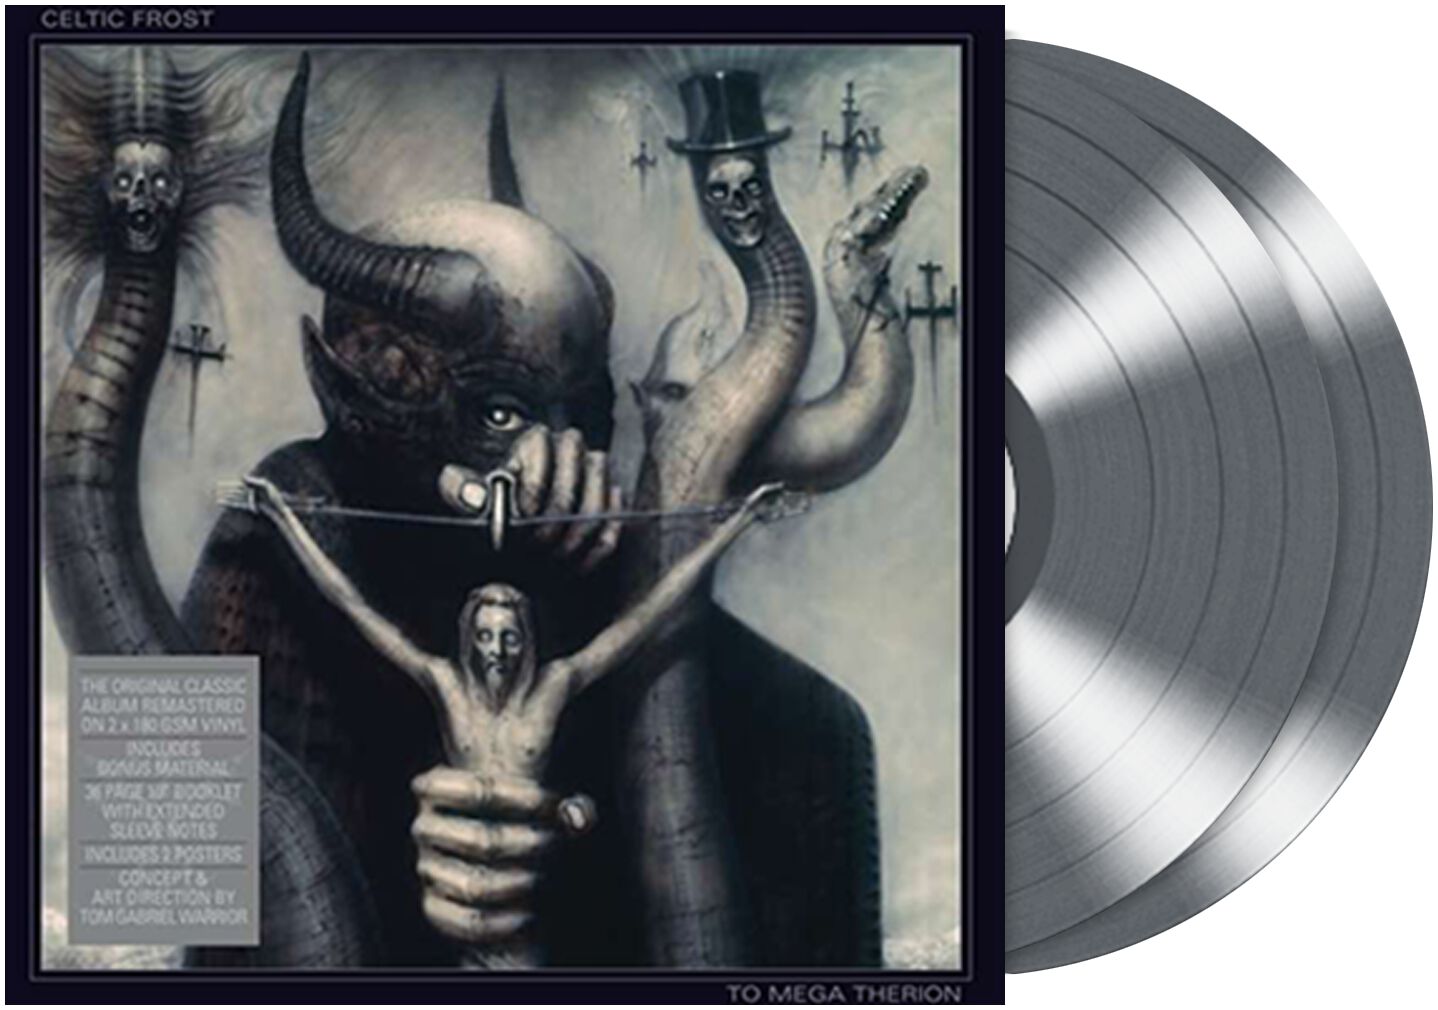 Celtic Frost To mega therion LP silberfarben